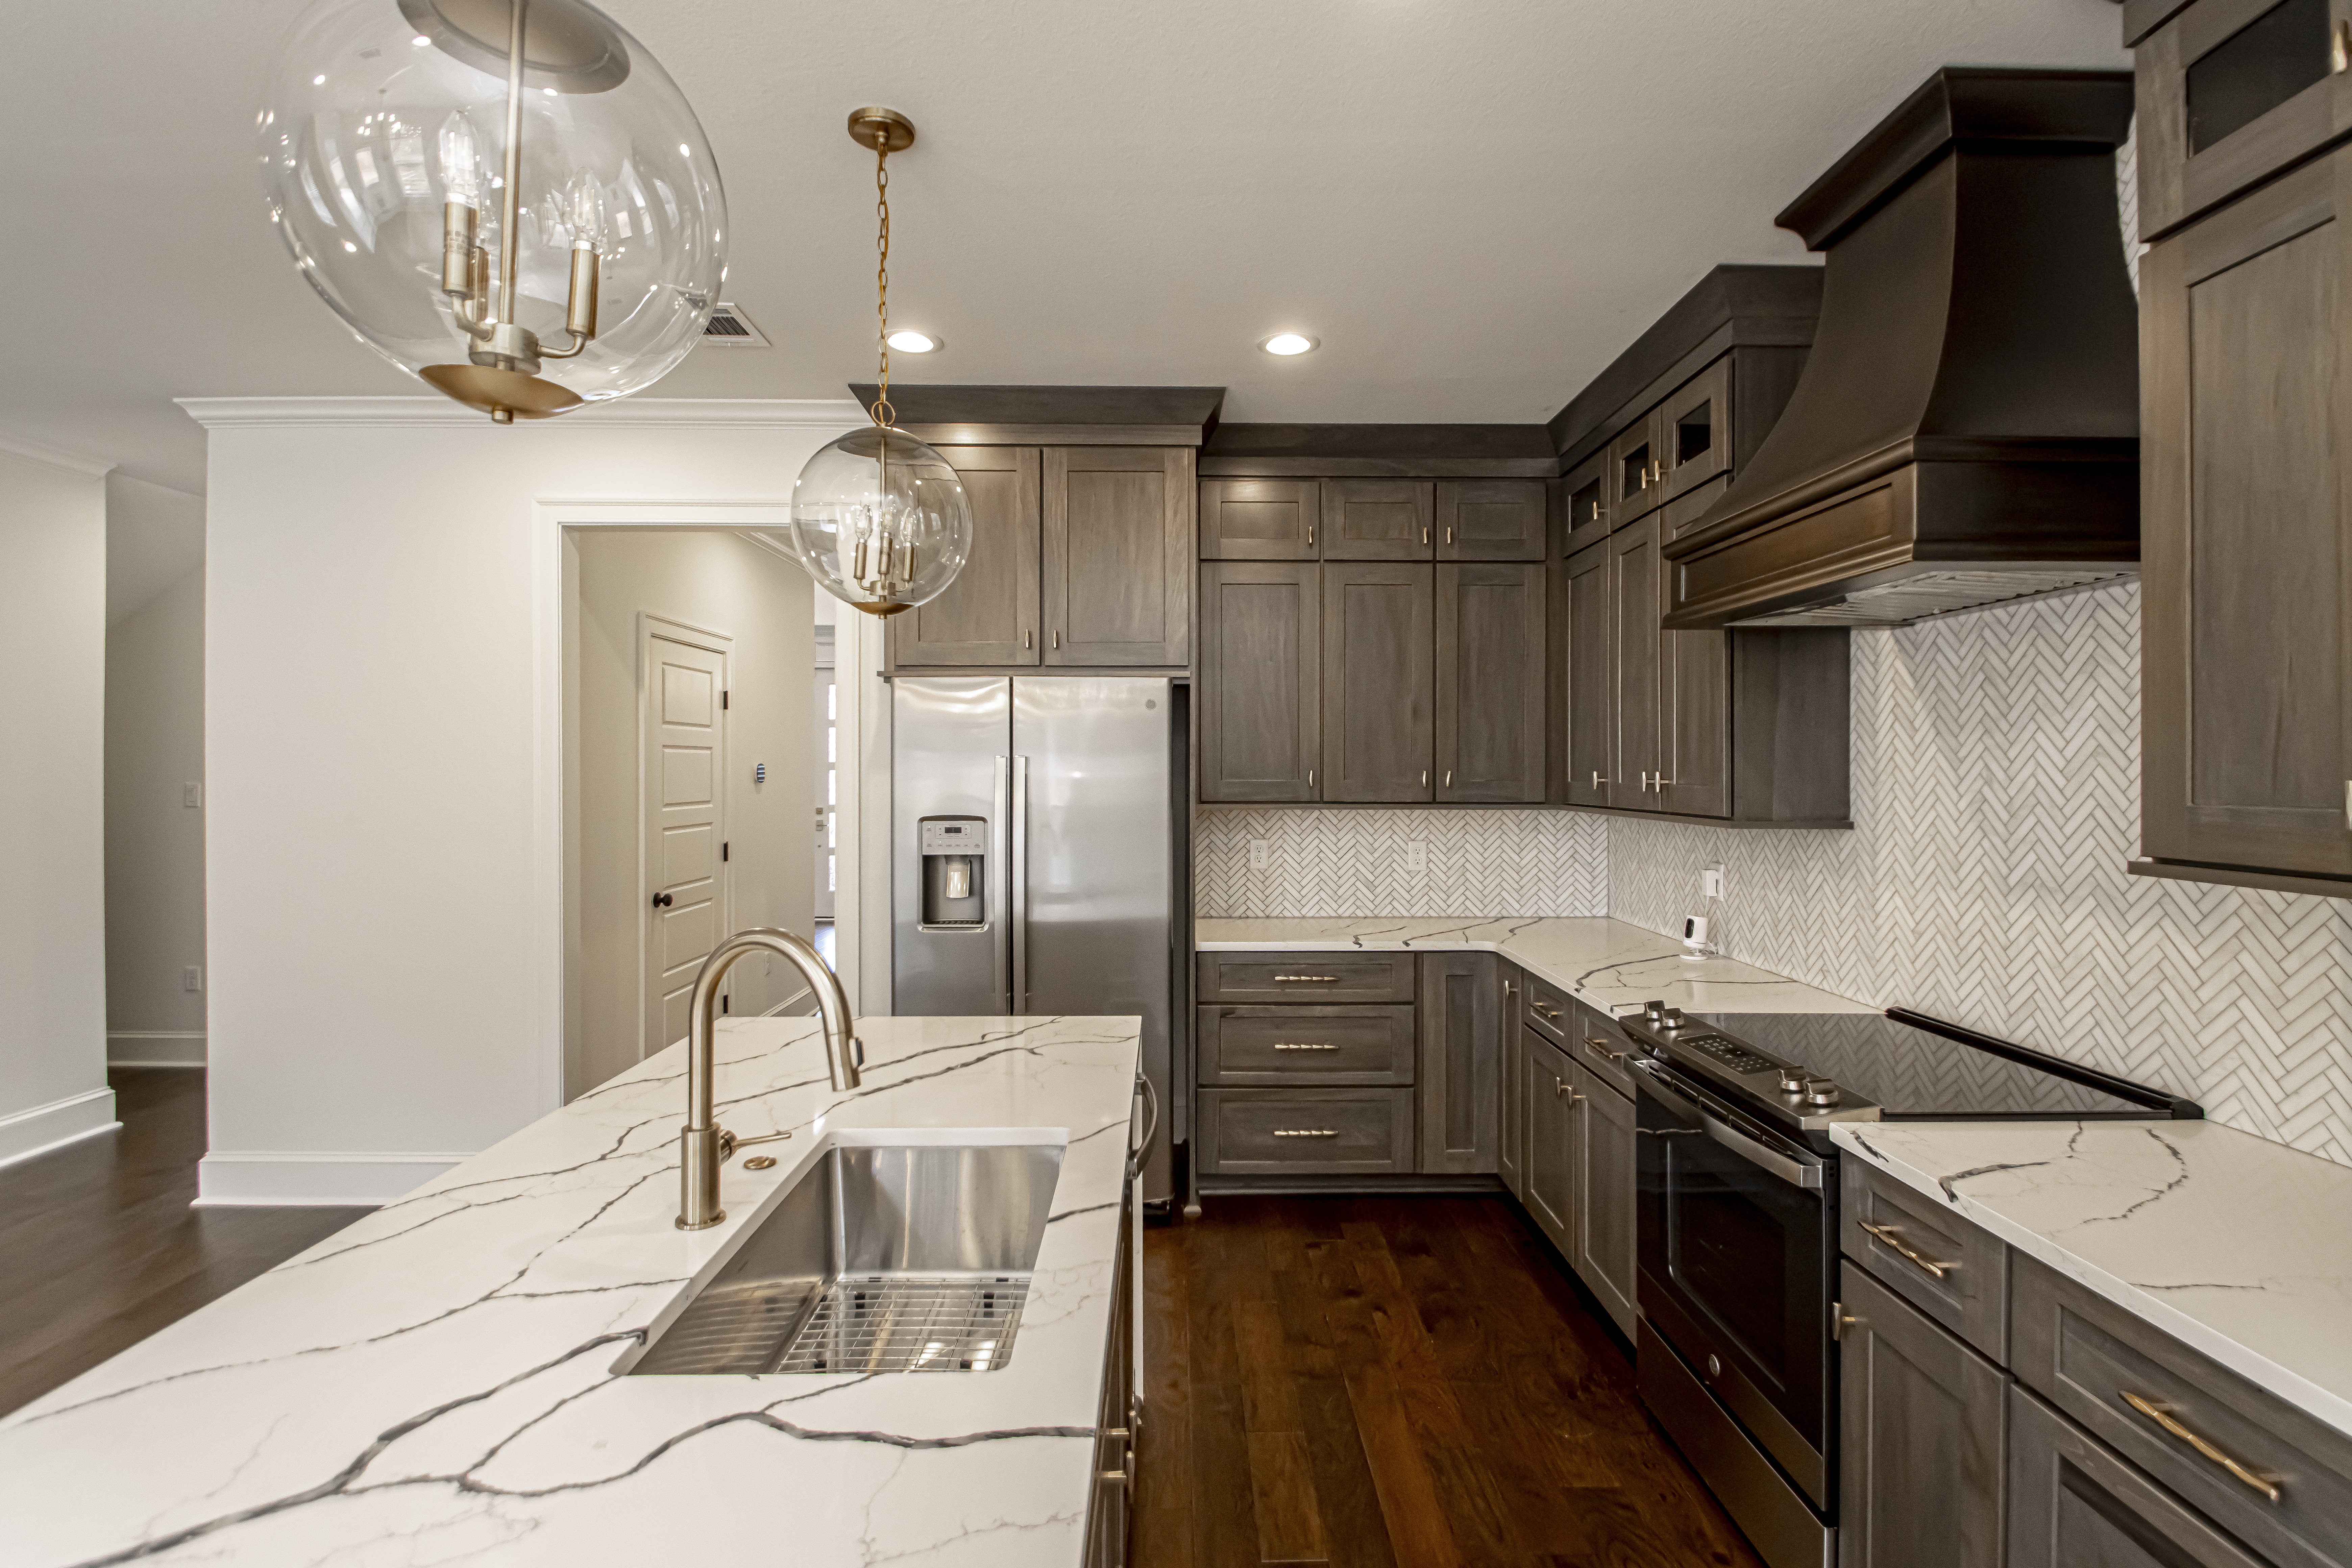 Incorporating range hood kitchen remodeling, grey kitchen cabinets complemented by elegant marble kitchen countertops